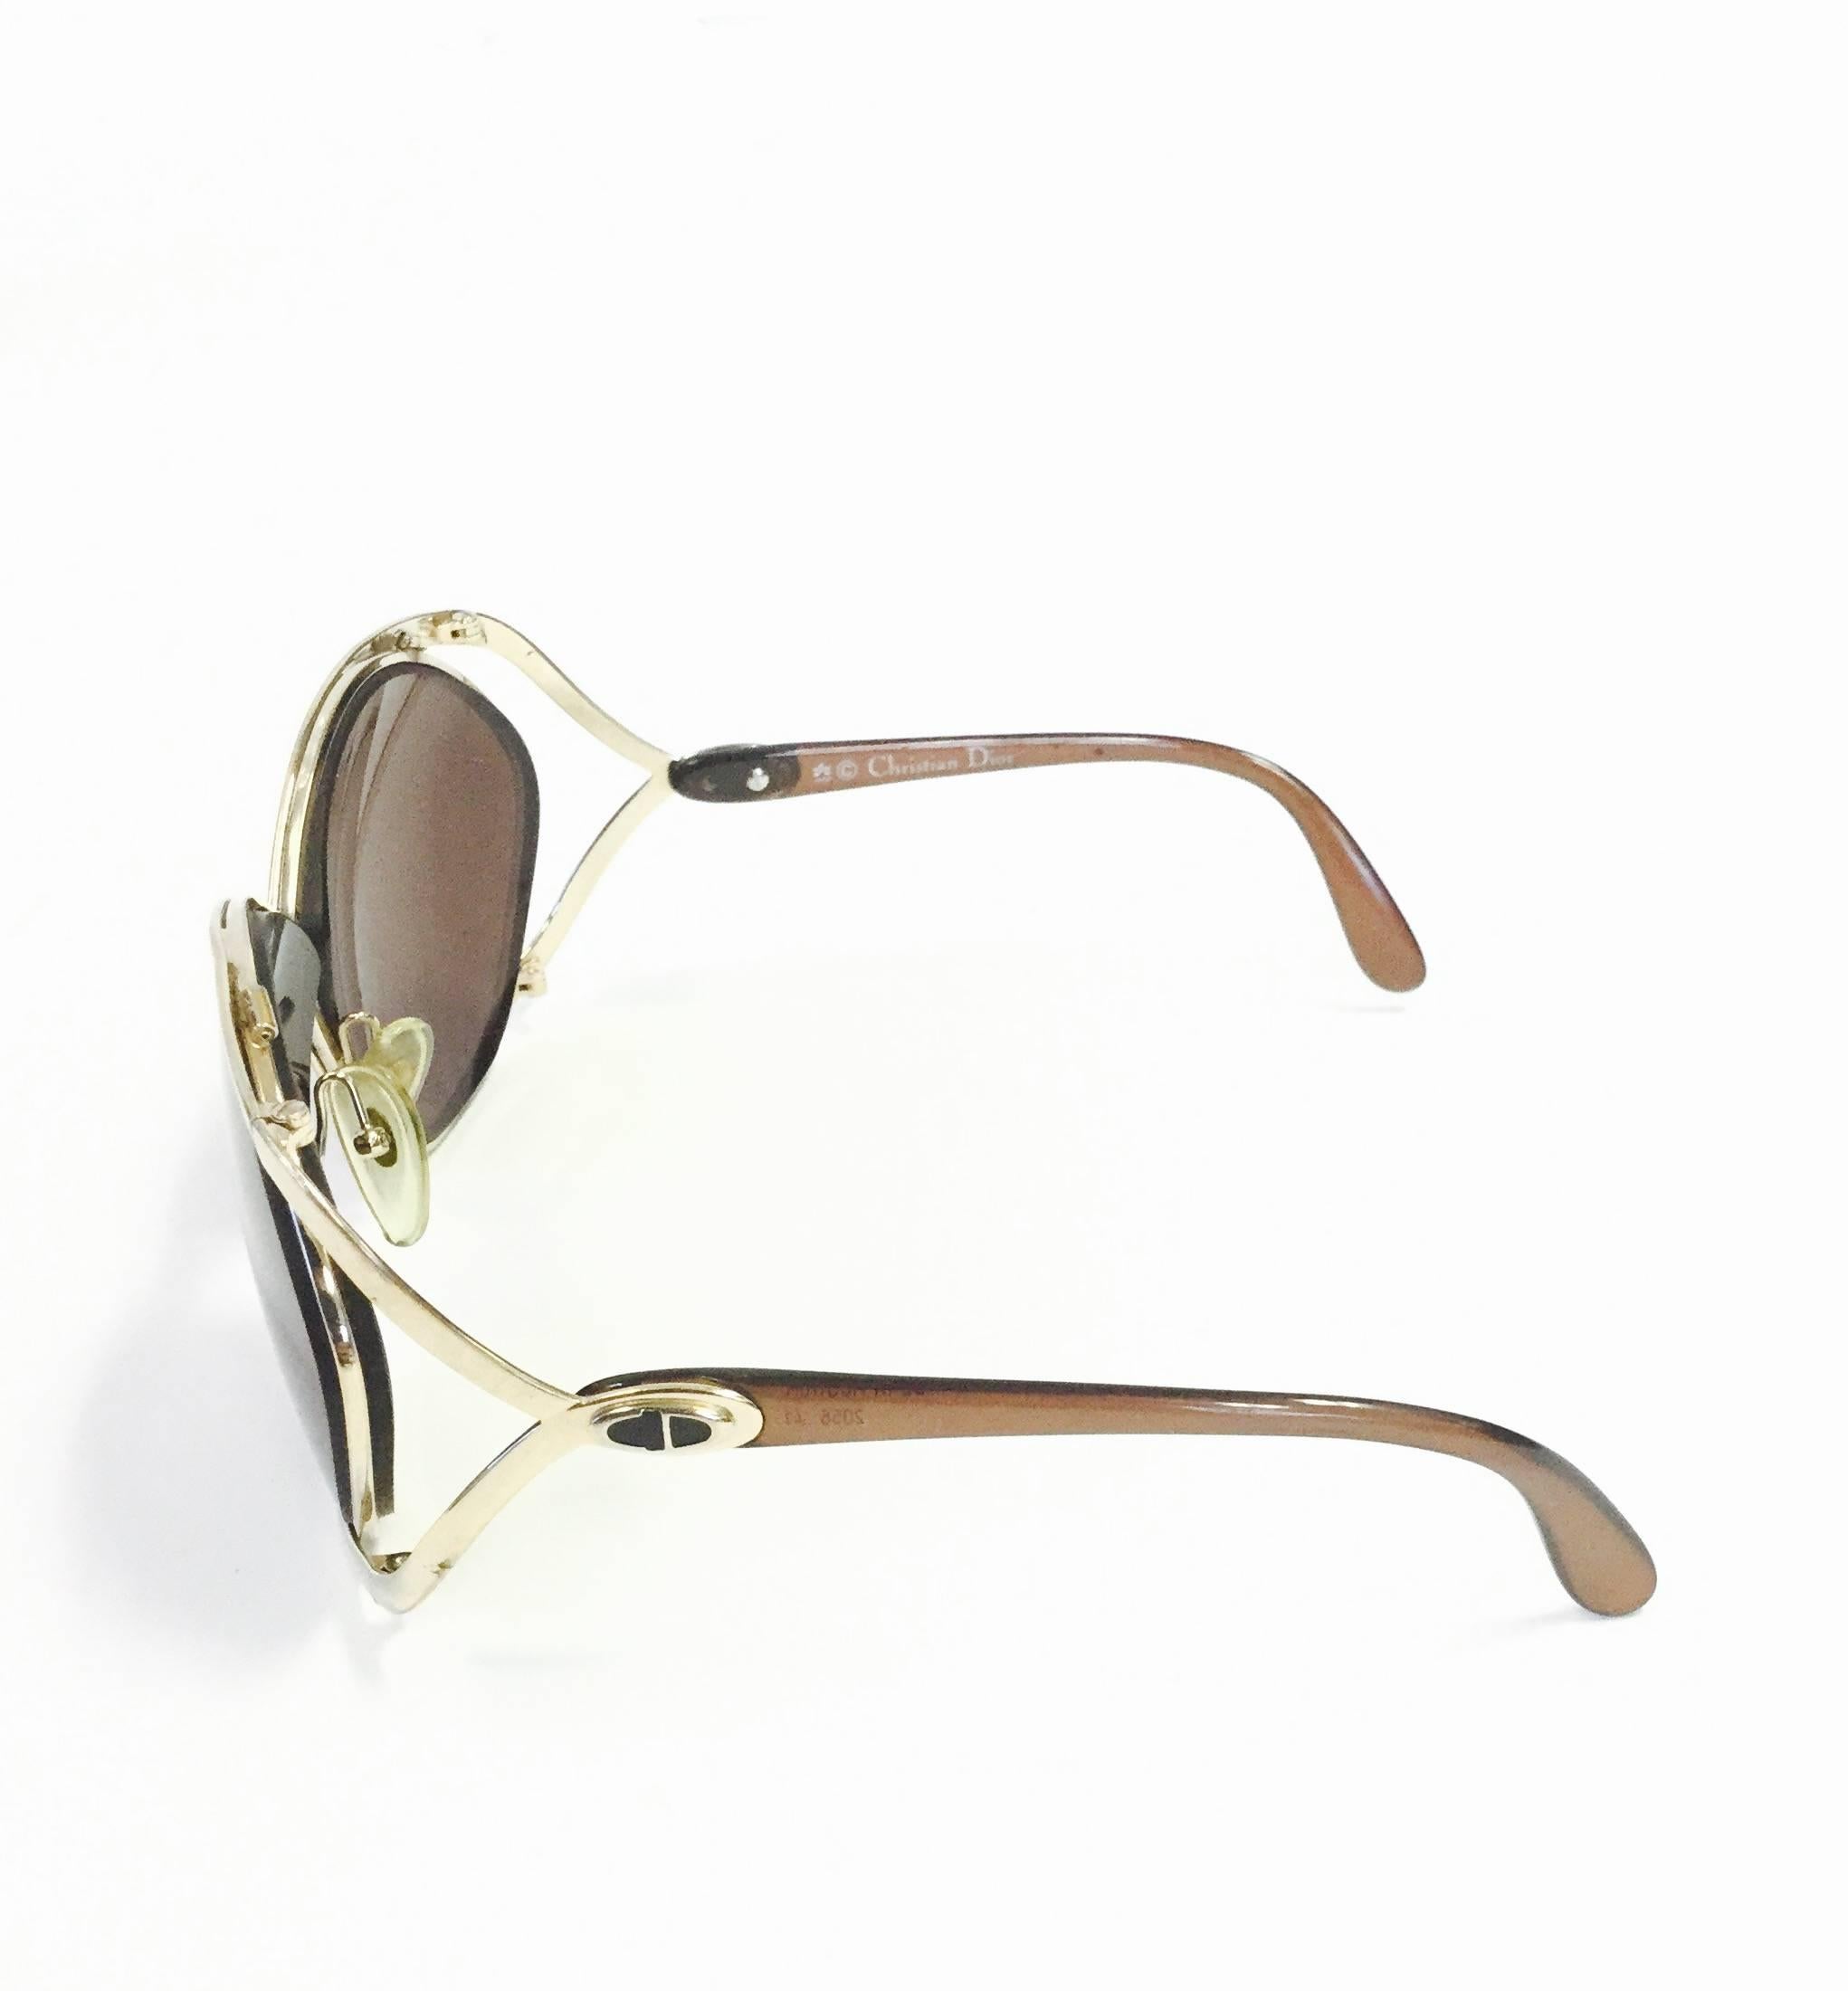 
Iconic 1980s Dior butterfly sunglasses! These glamorous, feminine sunglasses showcase Dior's famous butterfly design. The chocolate brown and gold-tone frames gently wrap around the oversized lenses. The letters "CD," for Christian Dior,